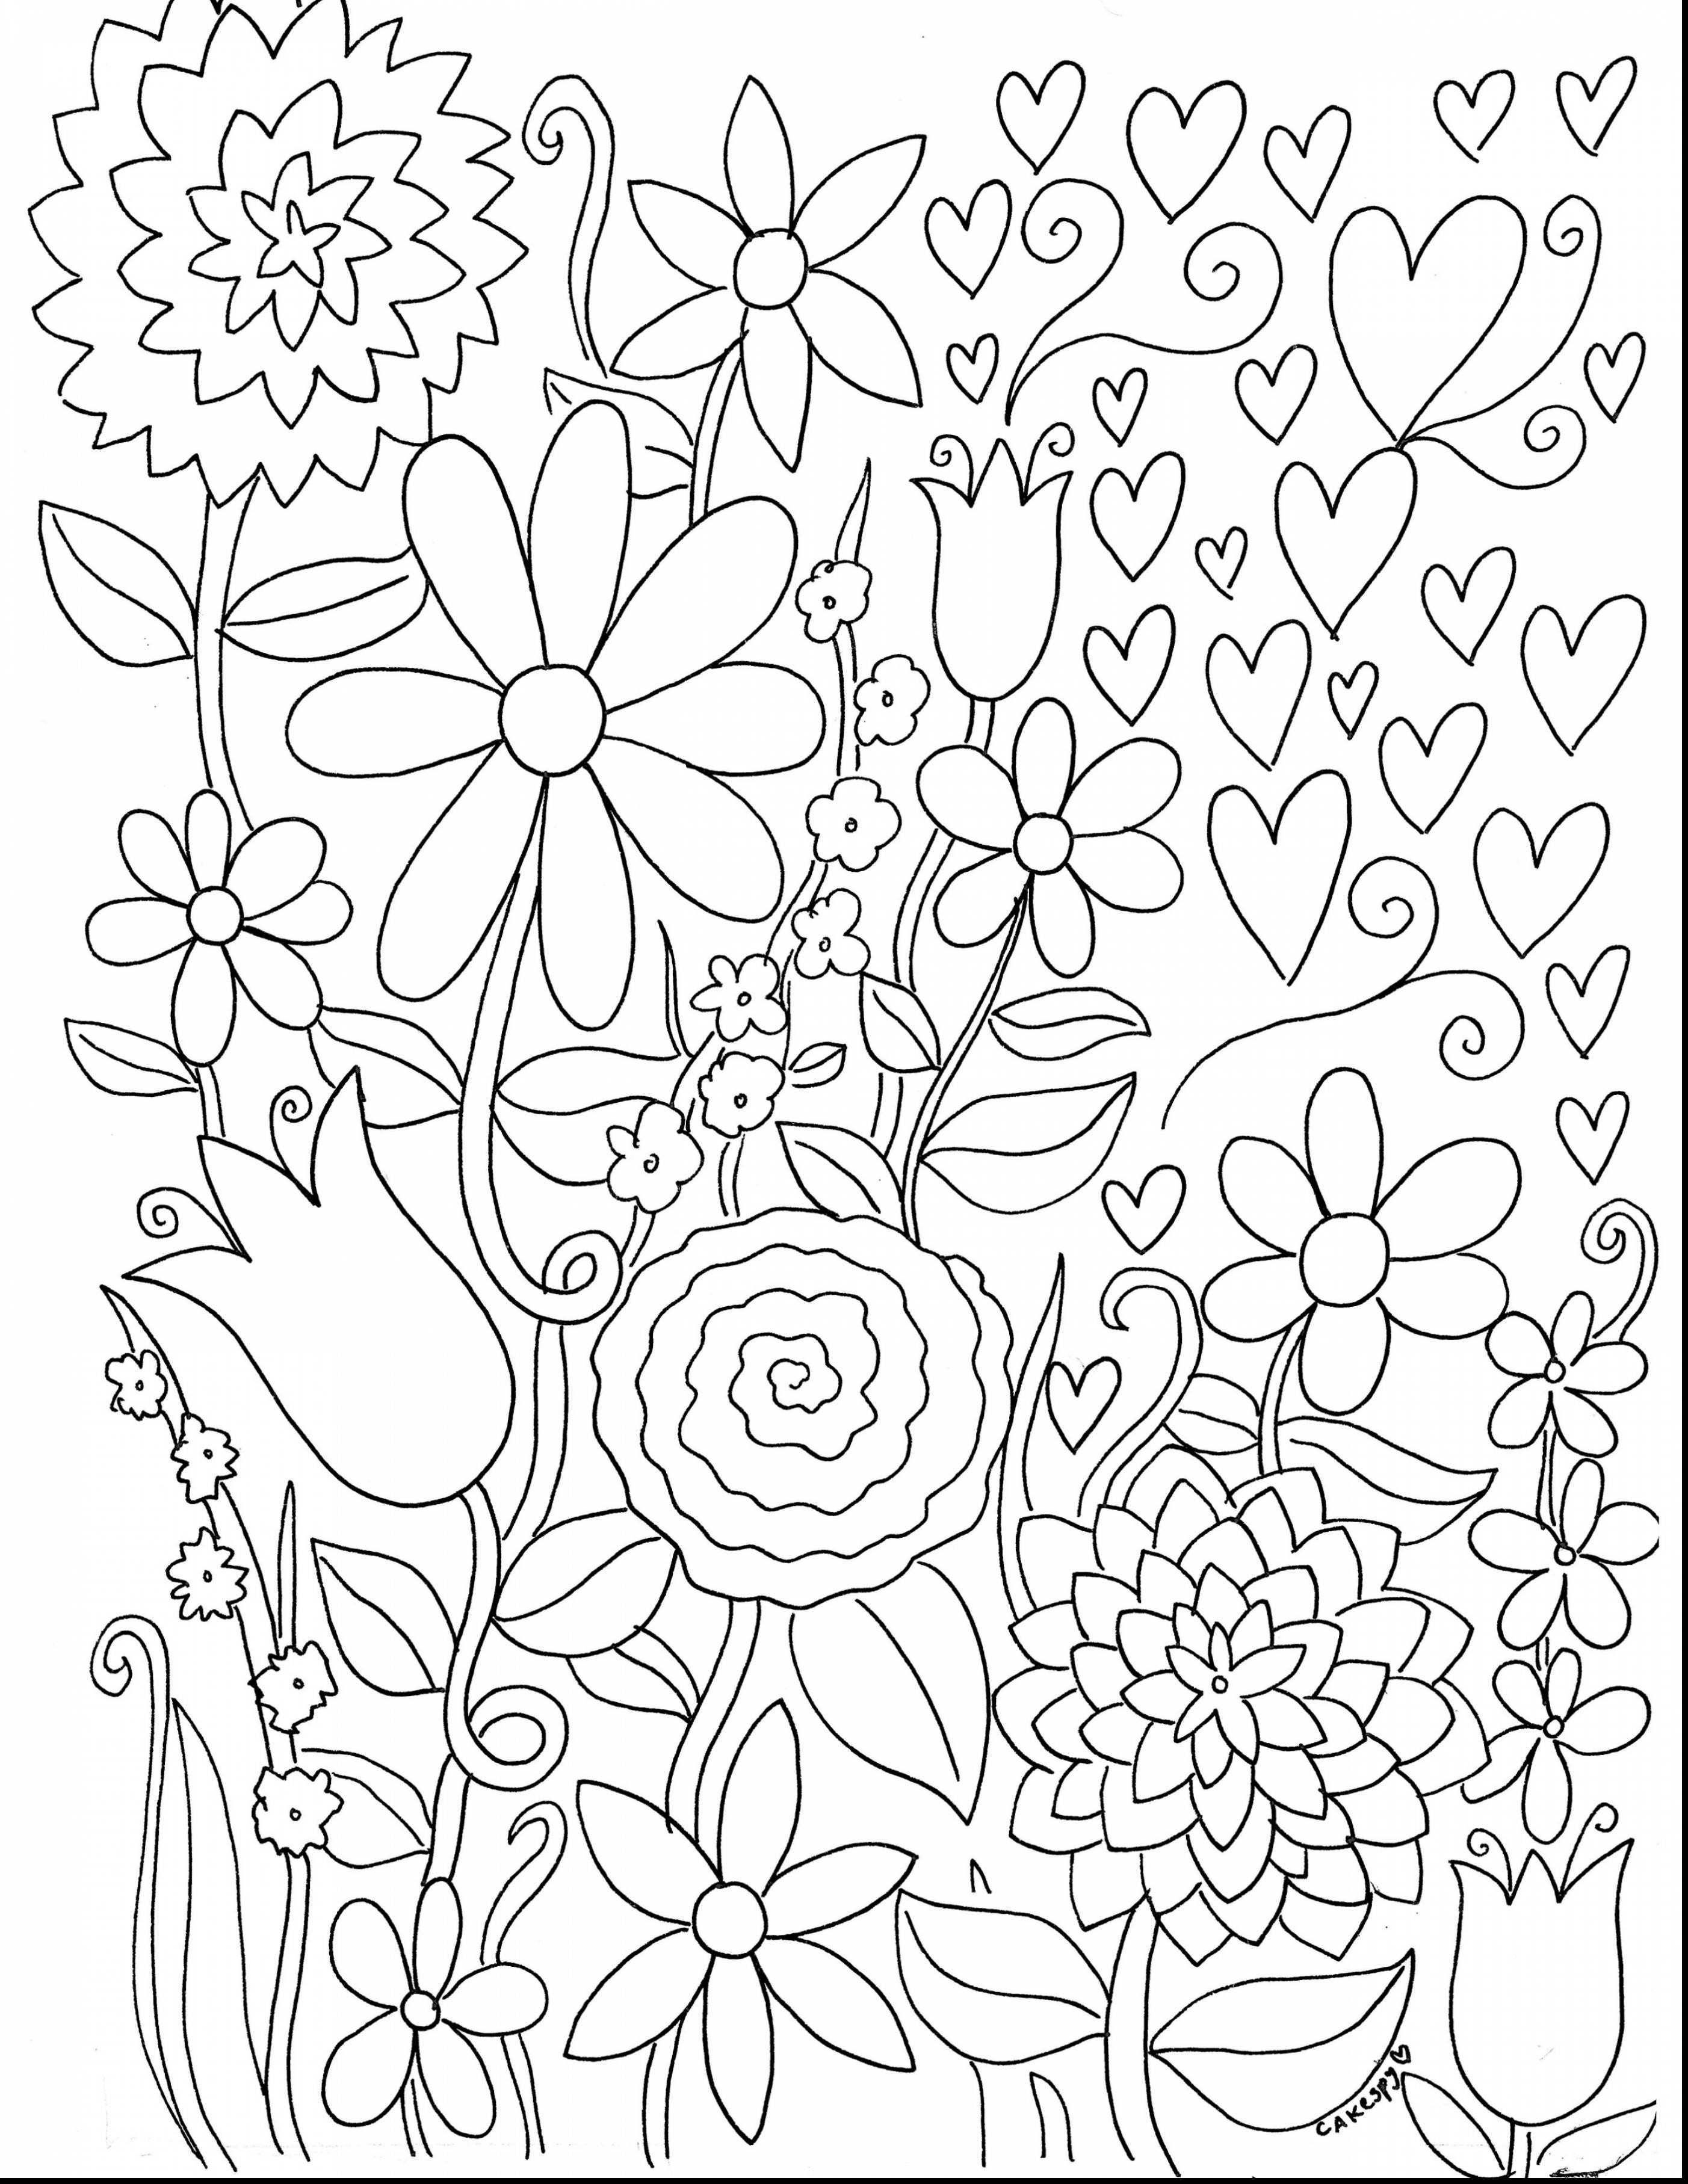 Make Your Own Coloring Pages For Free at GetColorings.com | Free